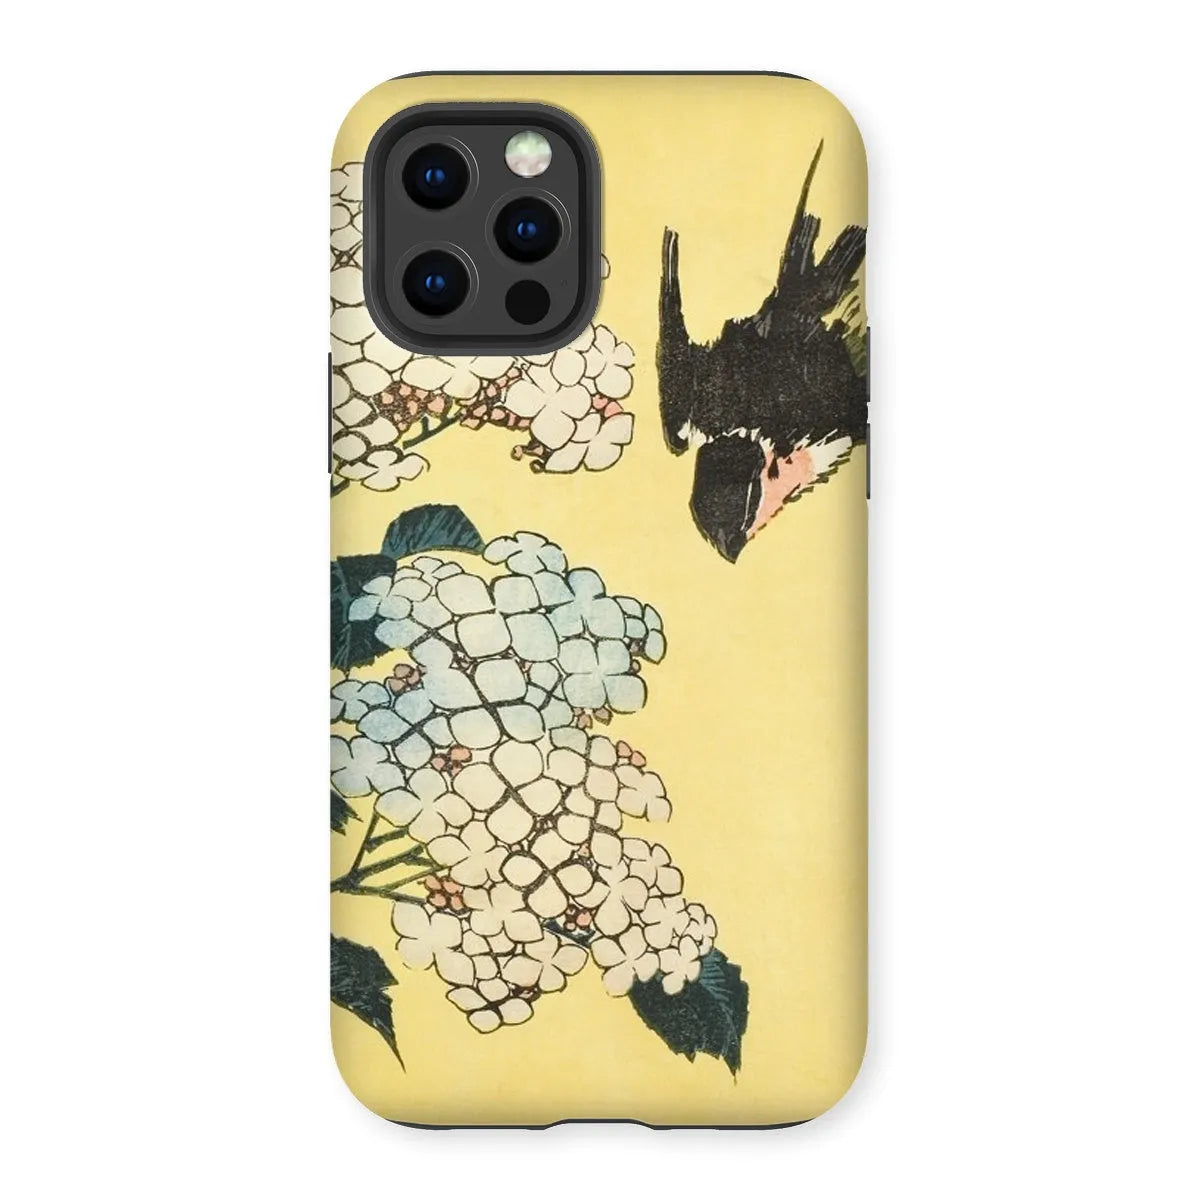 Hydrangea And Swallow - Japanese Art Phone Case - Hokusai - Iphone 12 Pro / Matte - Mobile Phone Cases - Aesthetic Art